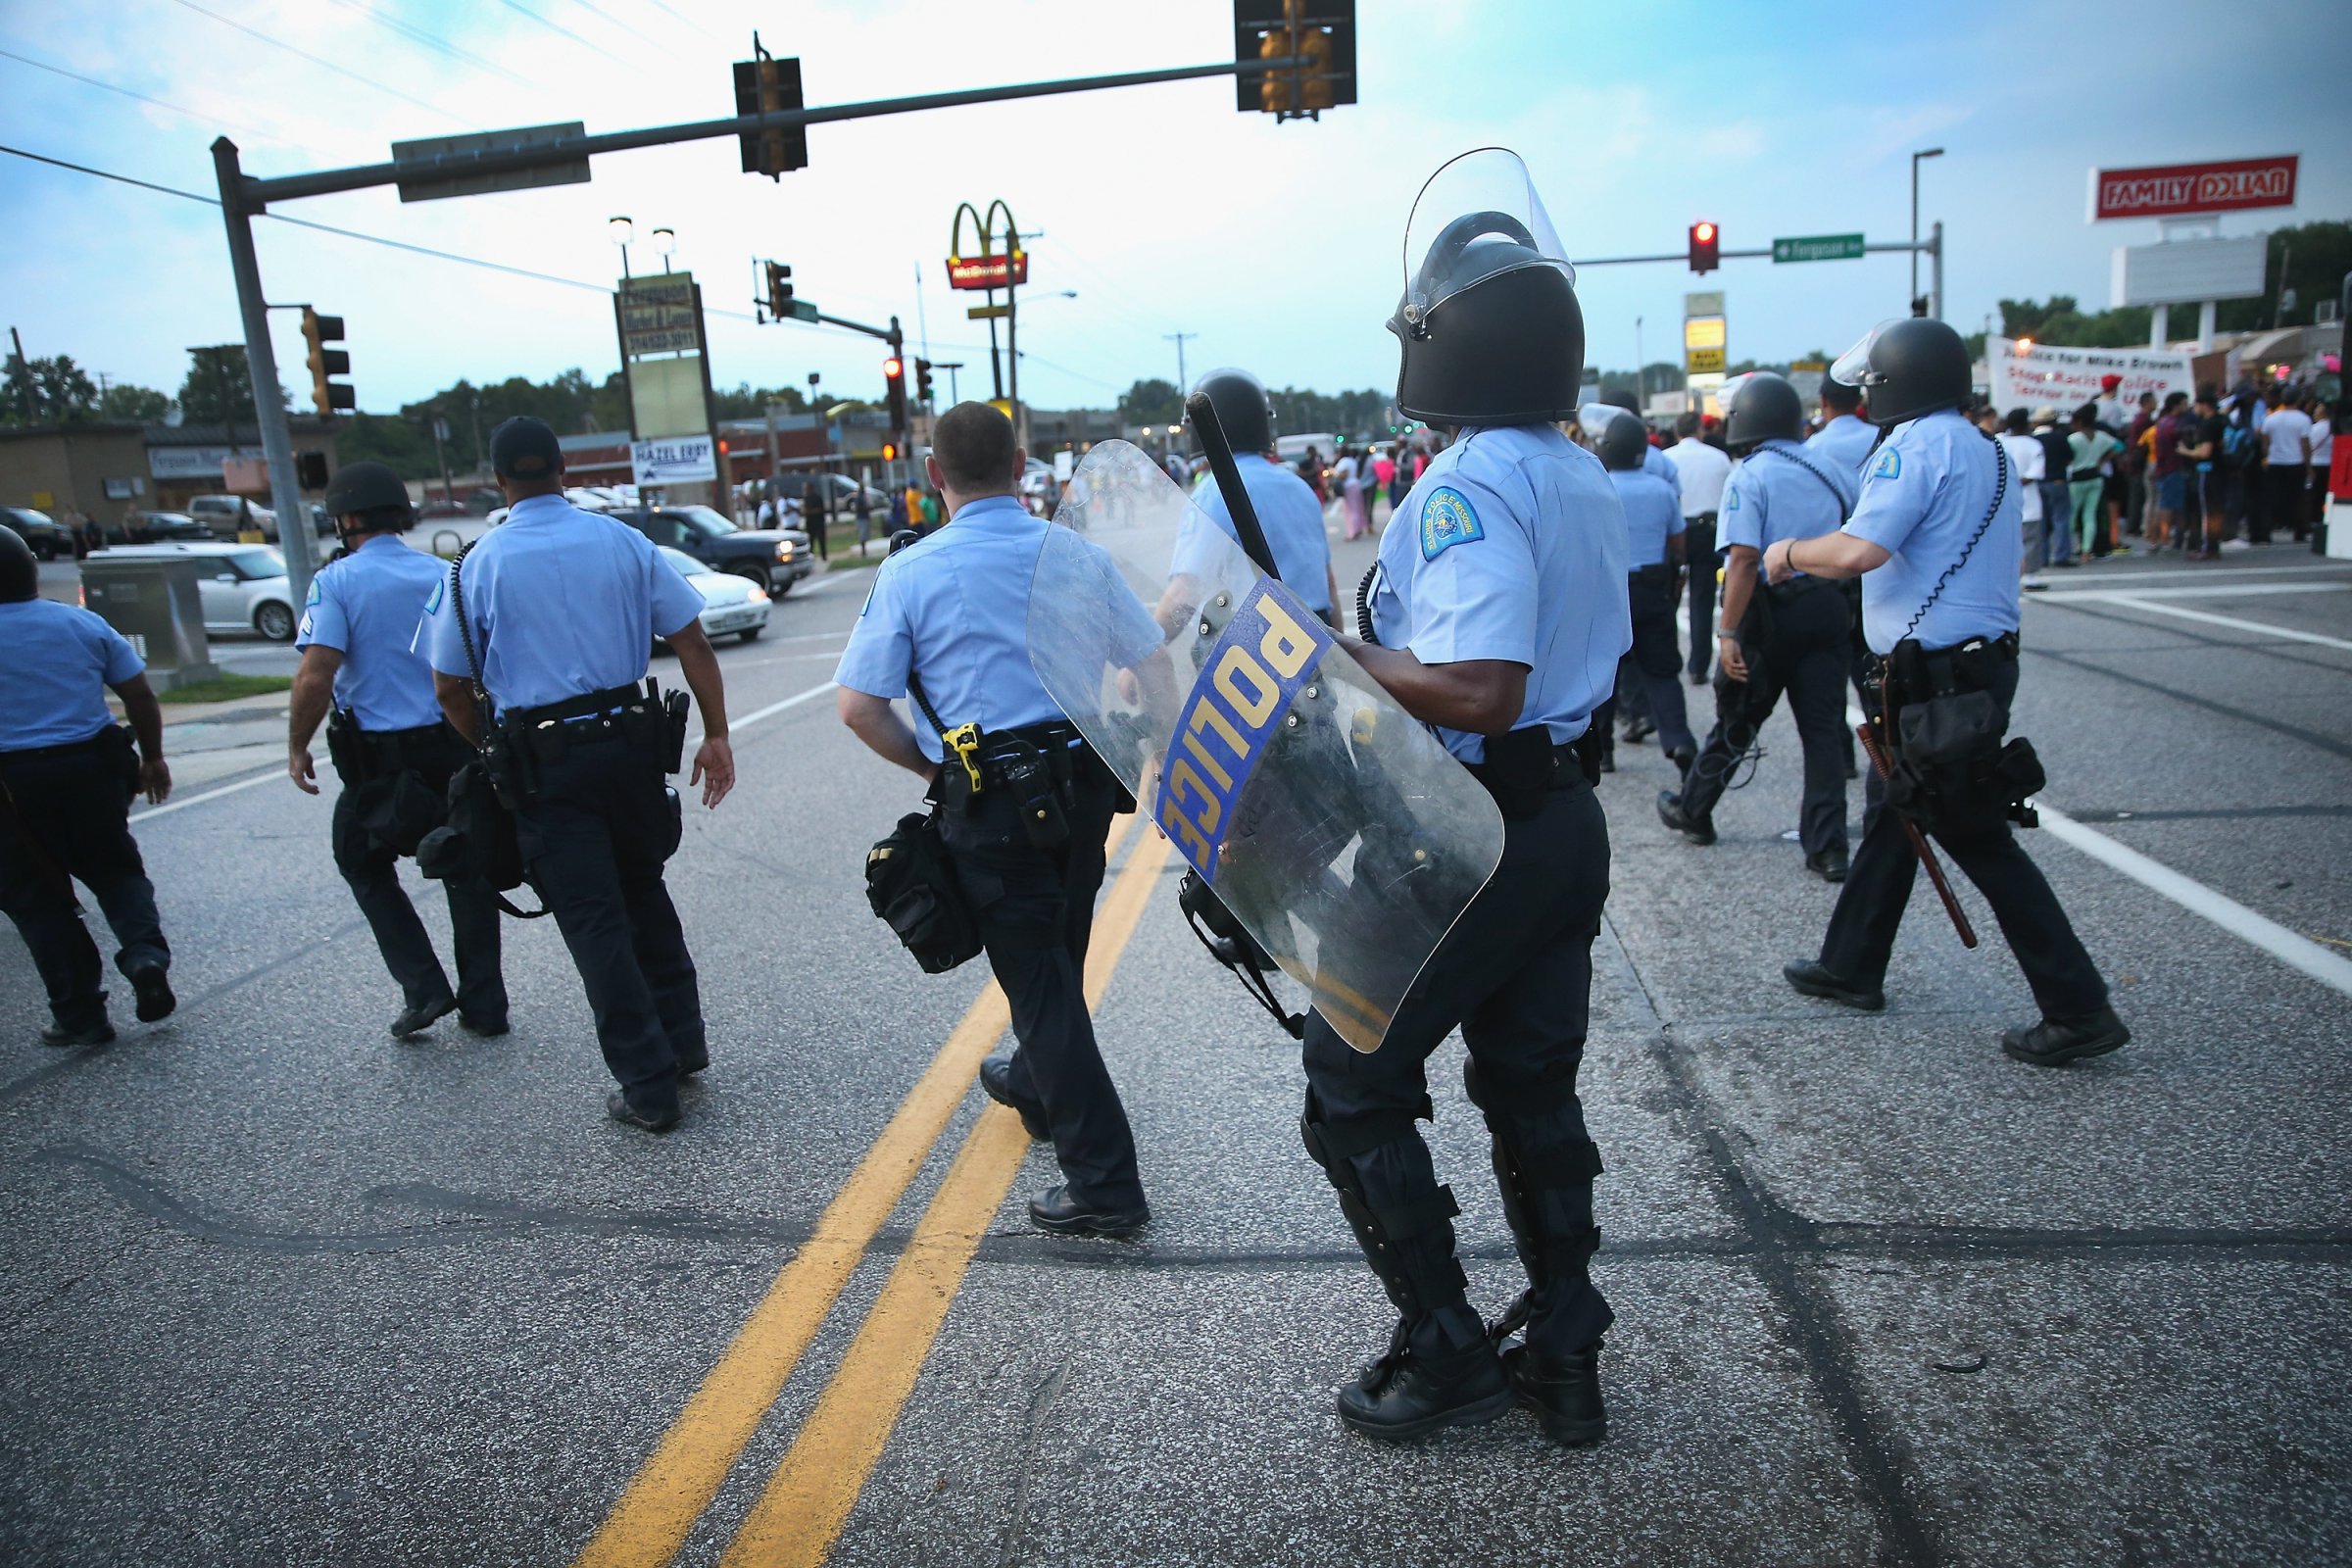 Police are deployed to keep peace along Florissant Avenue on Aug. 16, 2014 in Ferguson, Missouri.